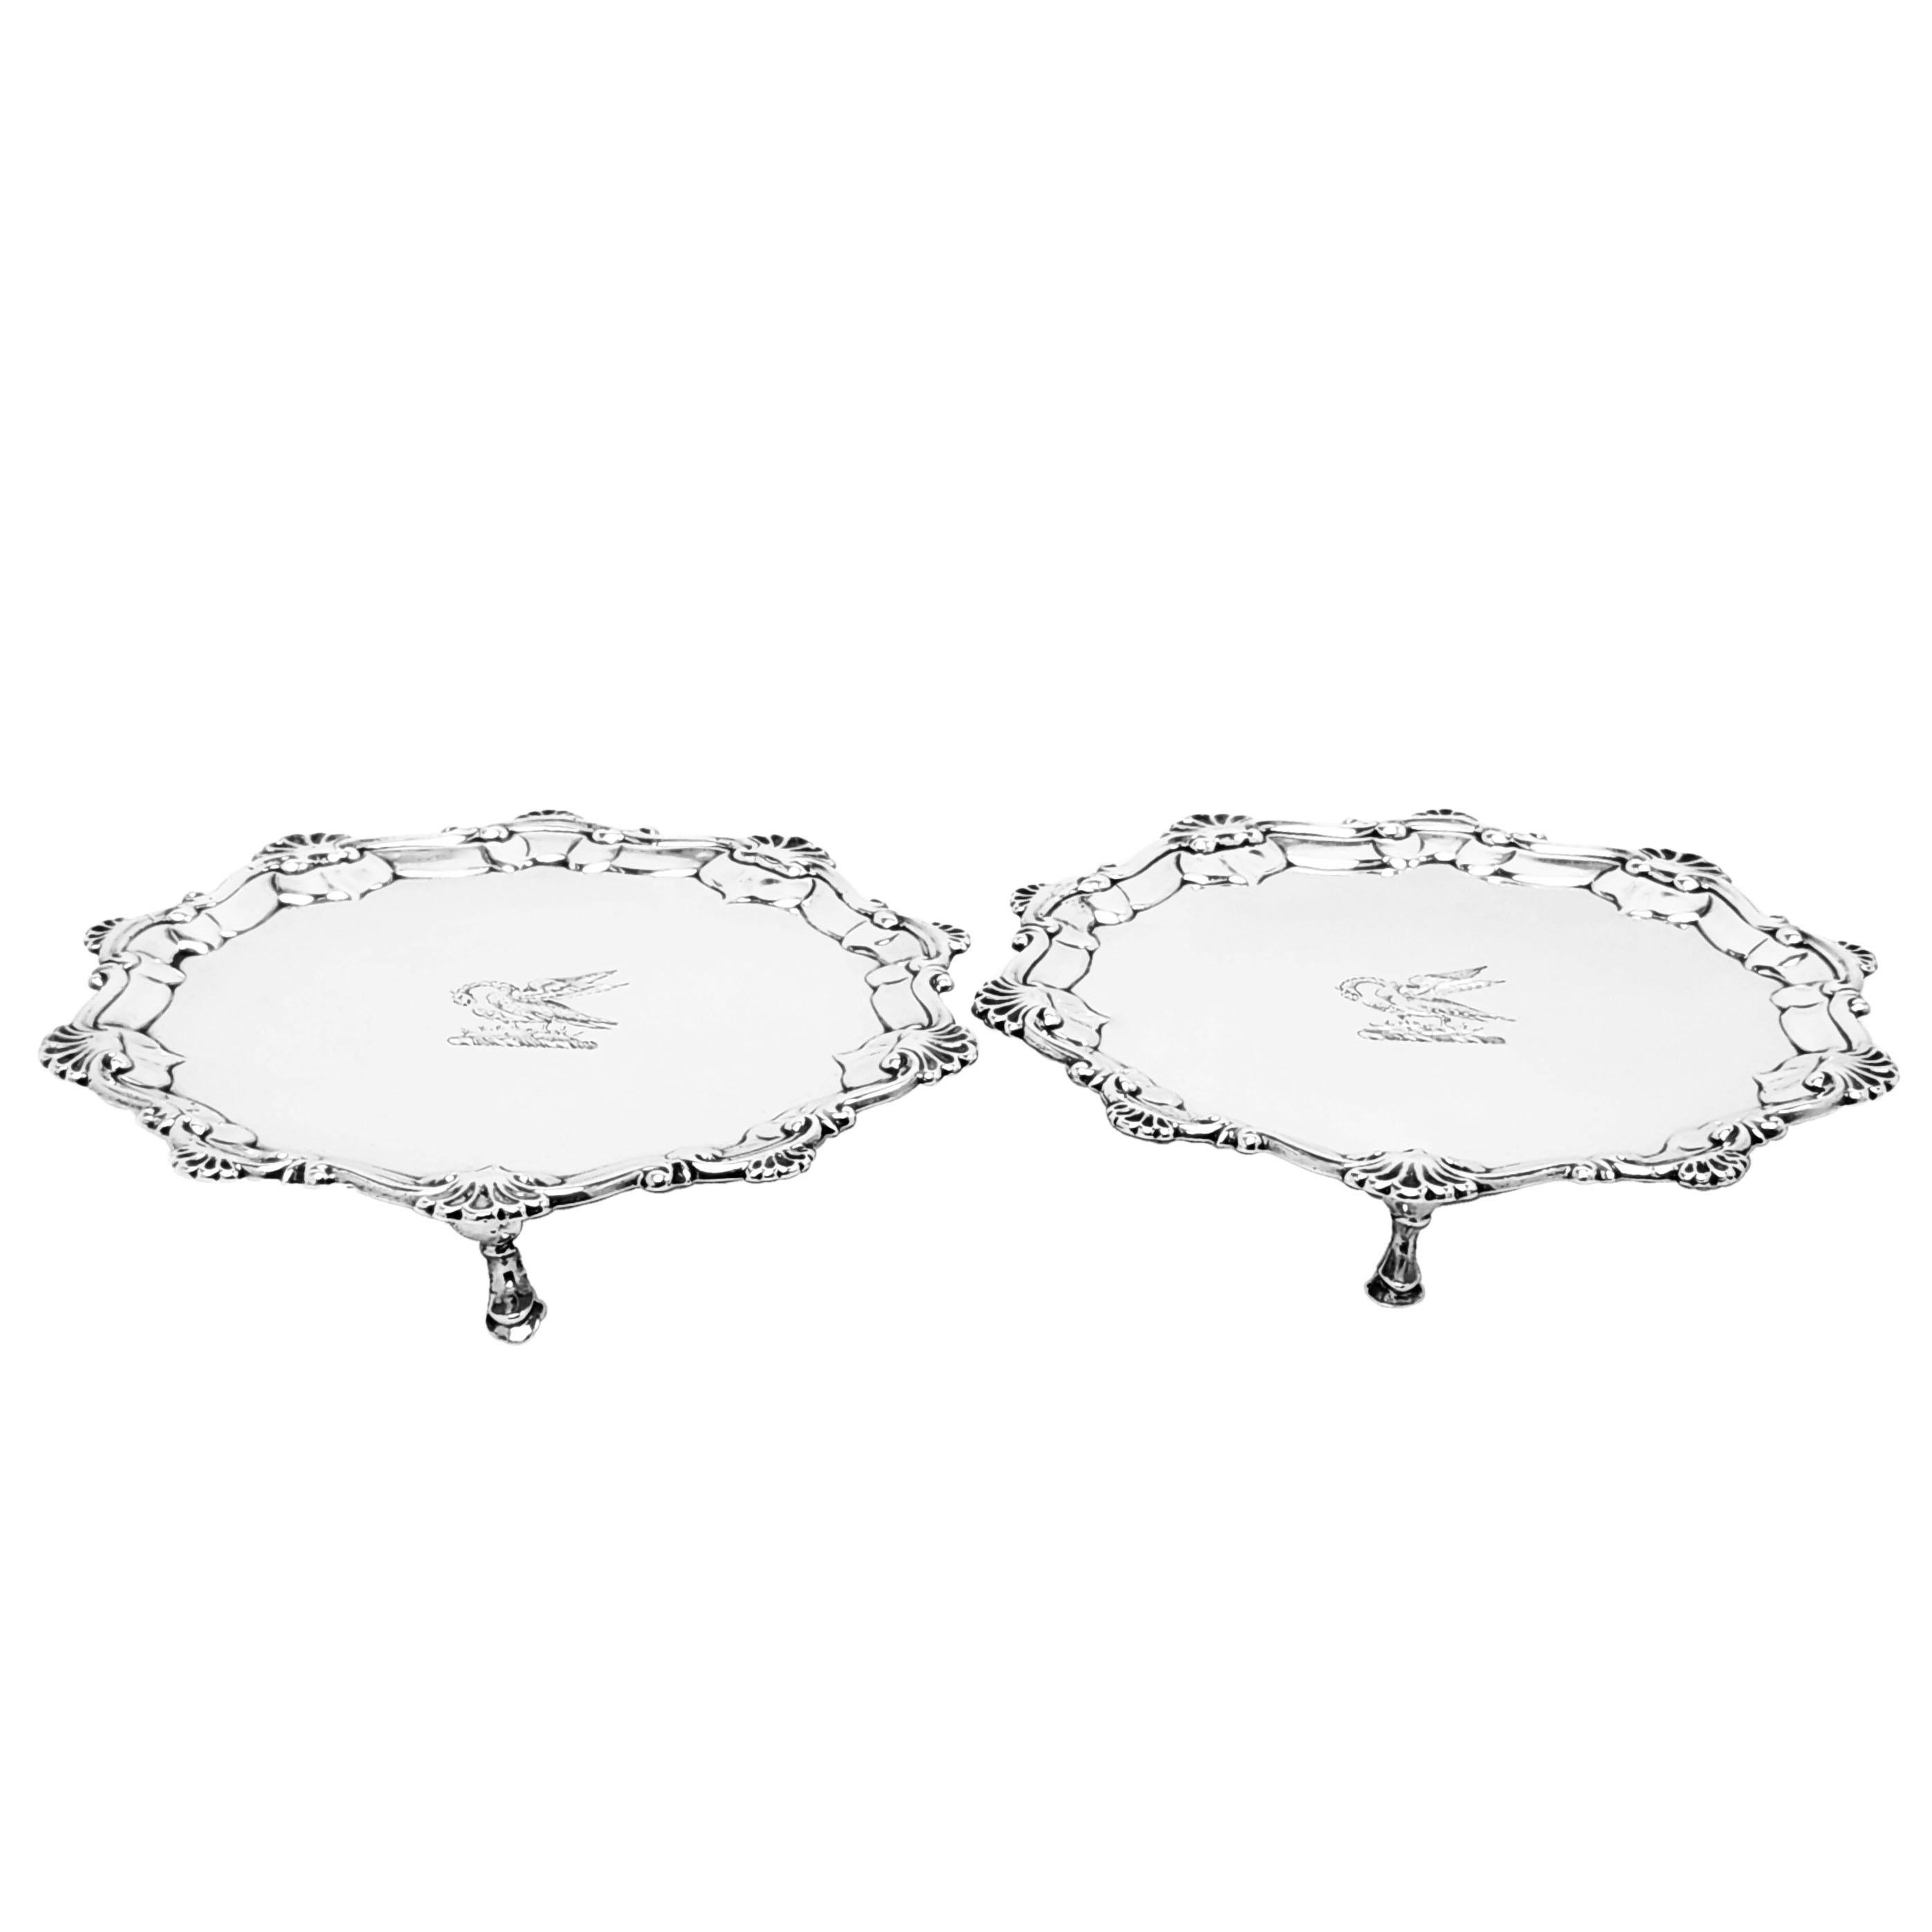 A pair of Antique George III Sterling Silver Salves each with a shaped shell border and with a crest engraved on the centre. Each Georgian Salver stands on 2 hoof feet.

Made in London in 1767 by John Cormick.

Approx. Total Weight - 406g /